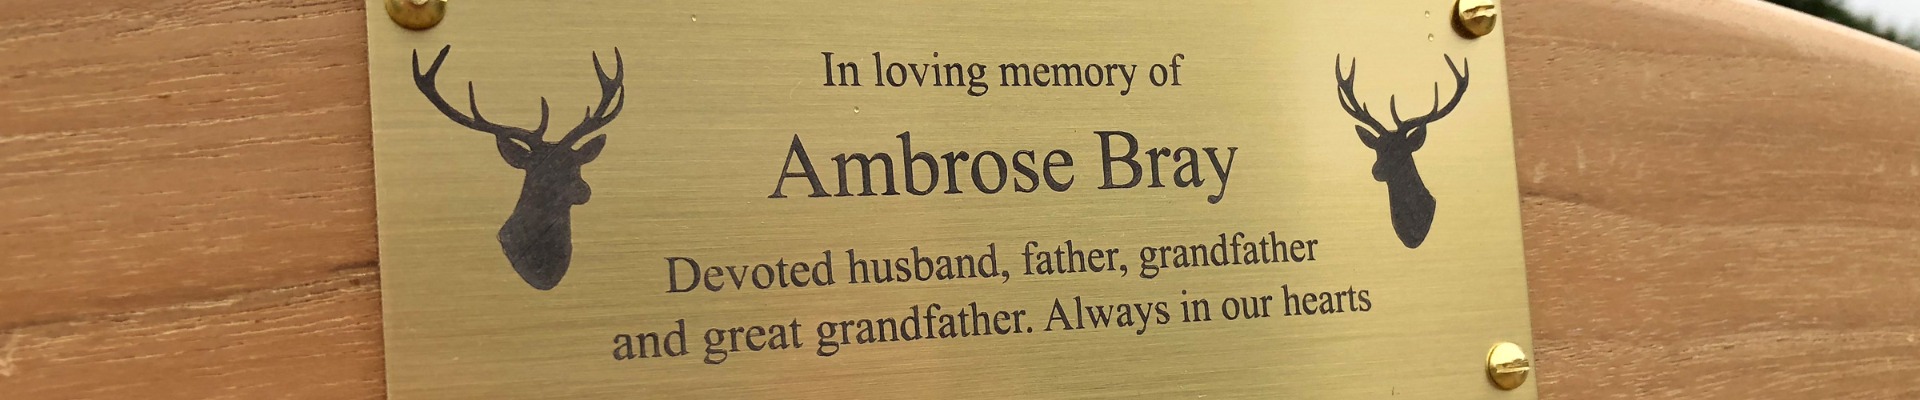 Images Engraved On Plaques